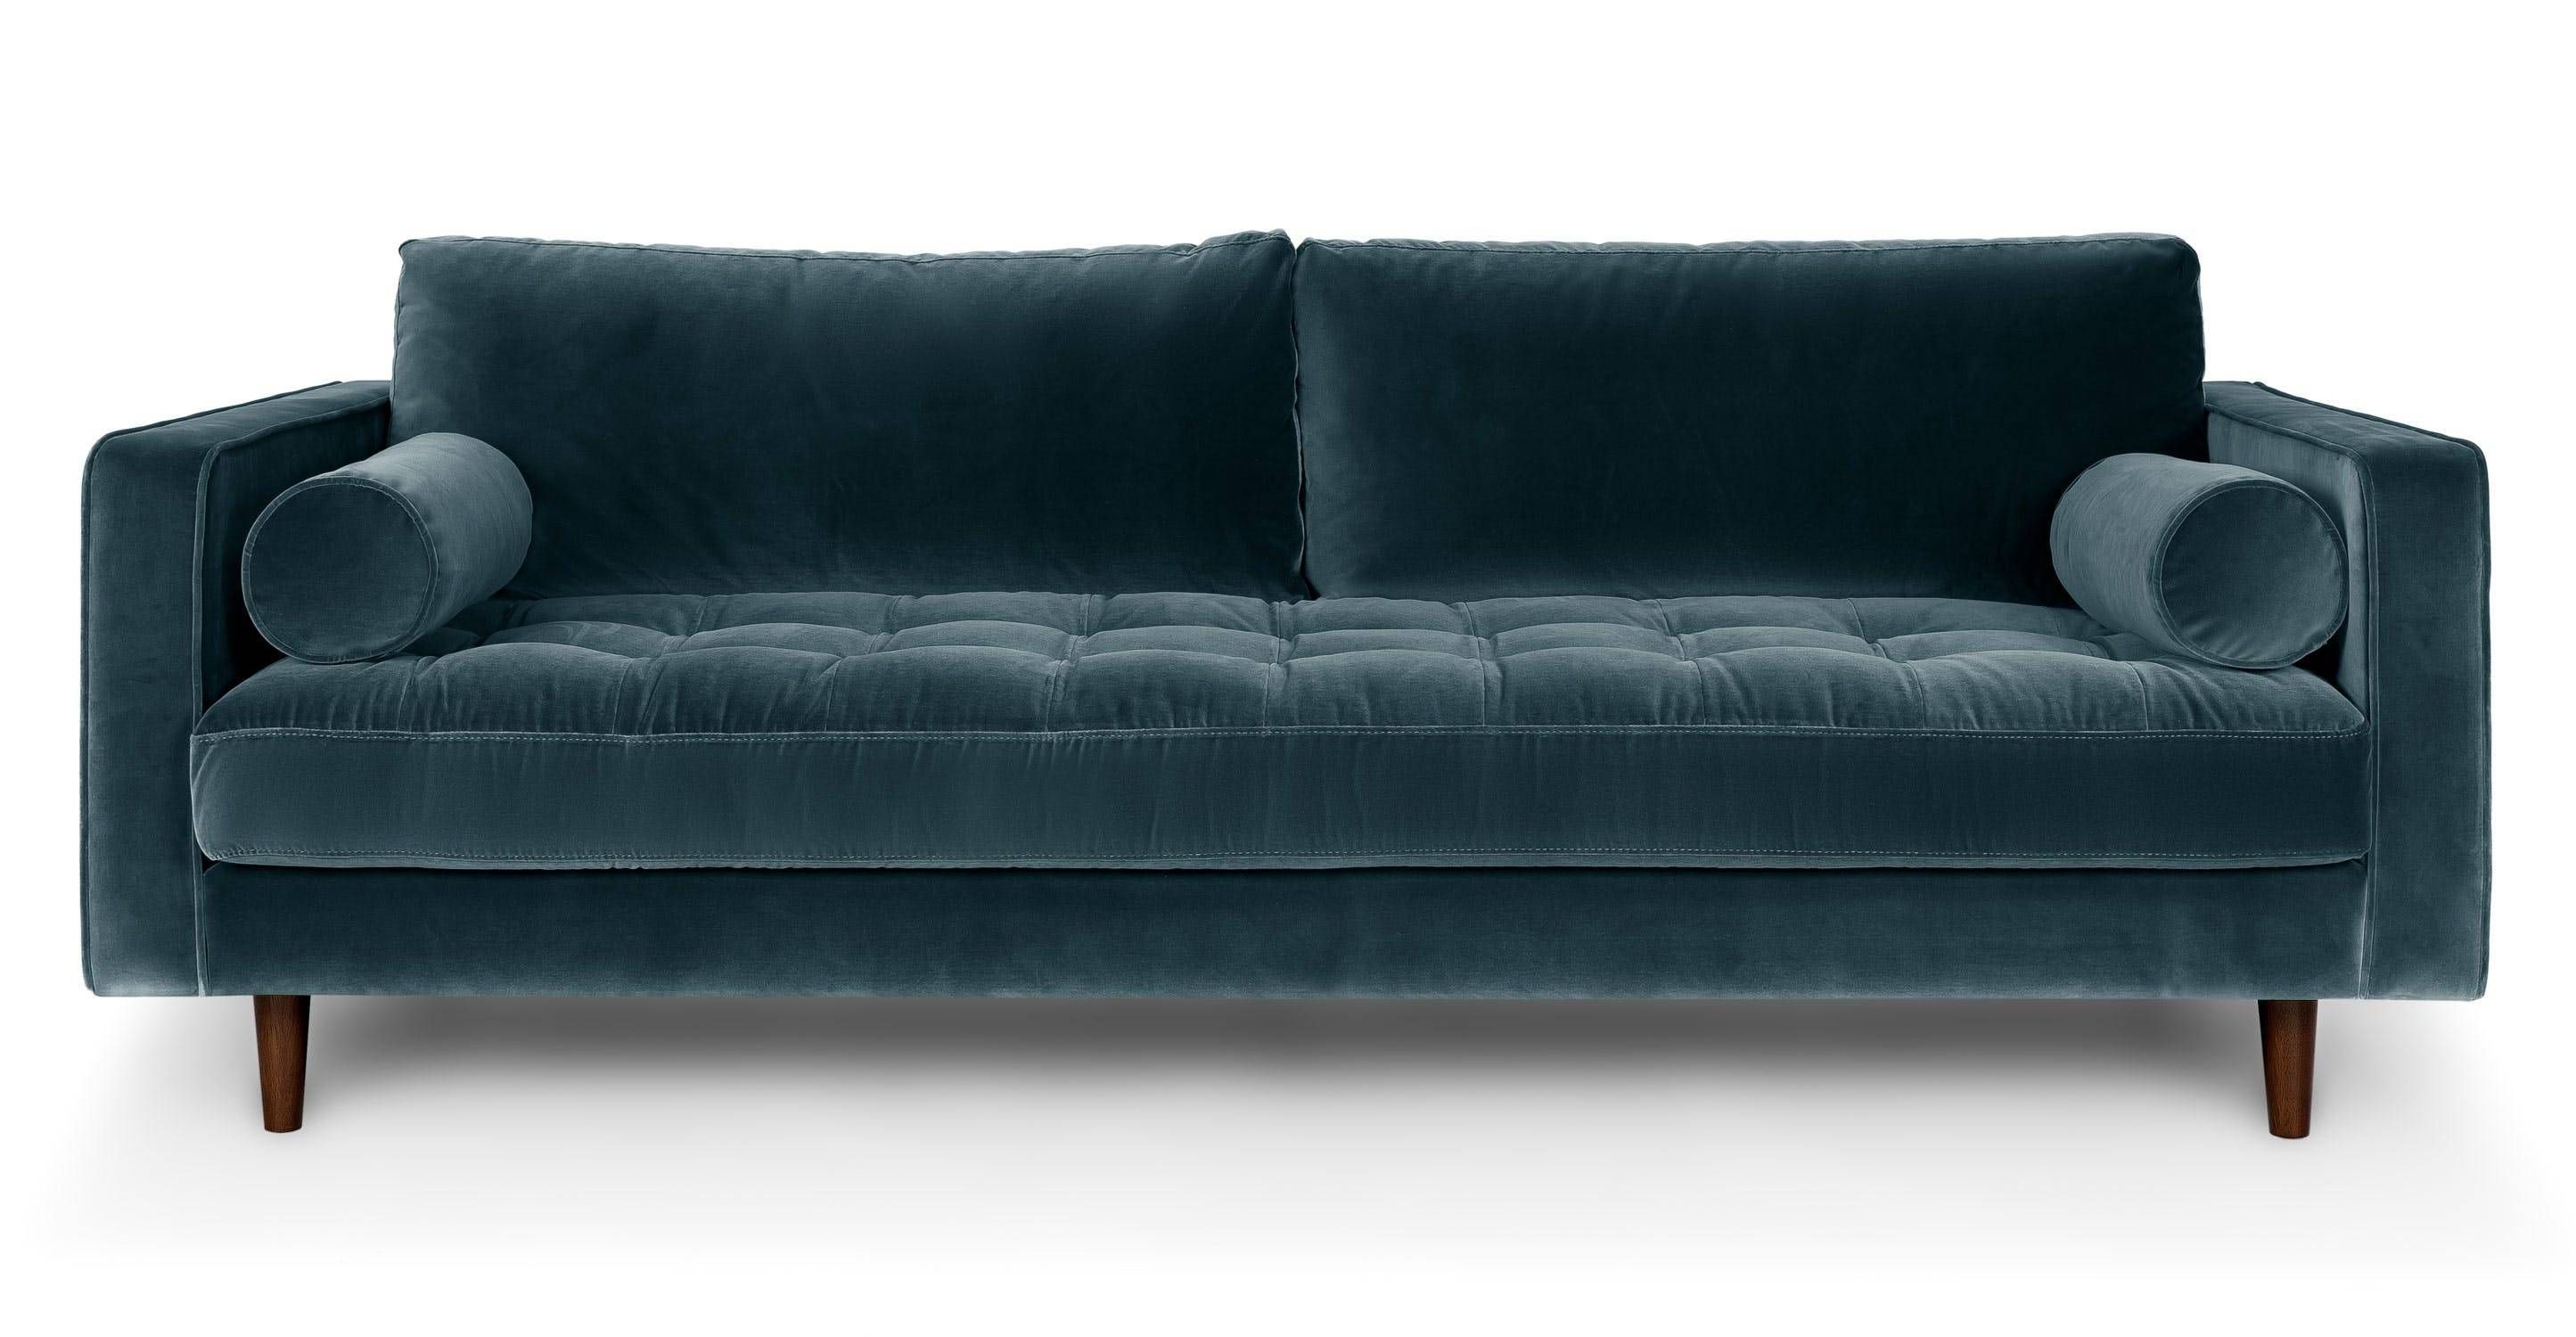 Sofas Center : Most Comfortable Sofa Beds Ever Sofas And Loveseats For Short Sofas (View 10 of 15)